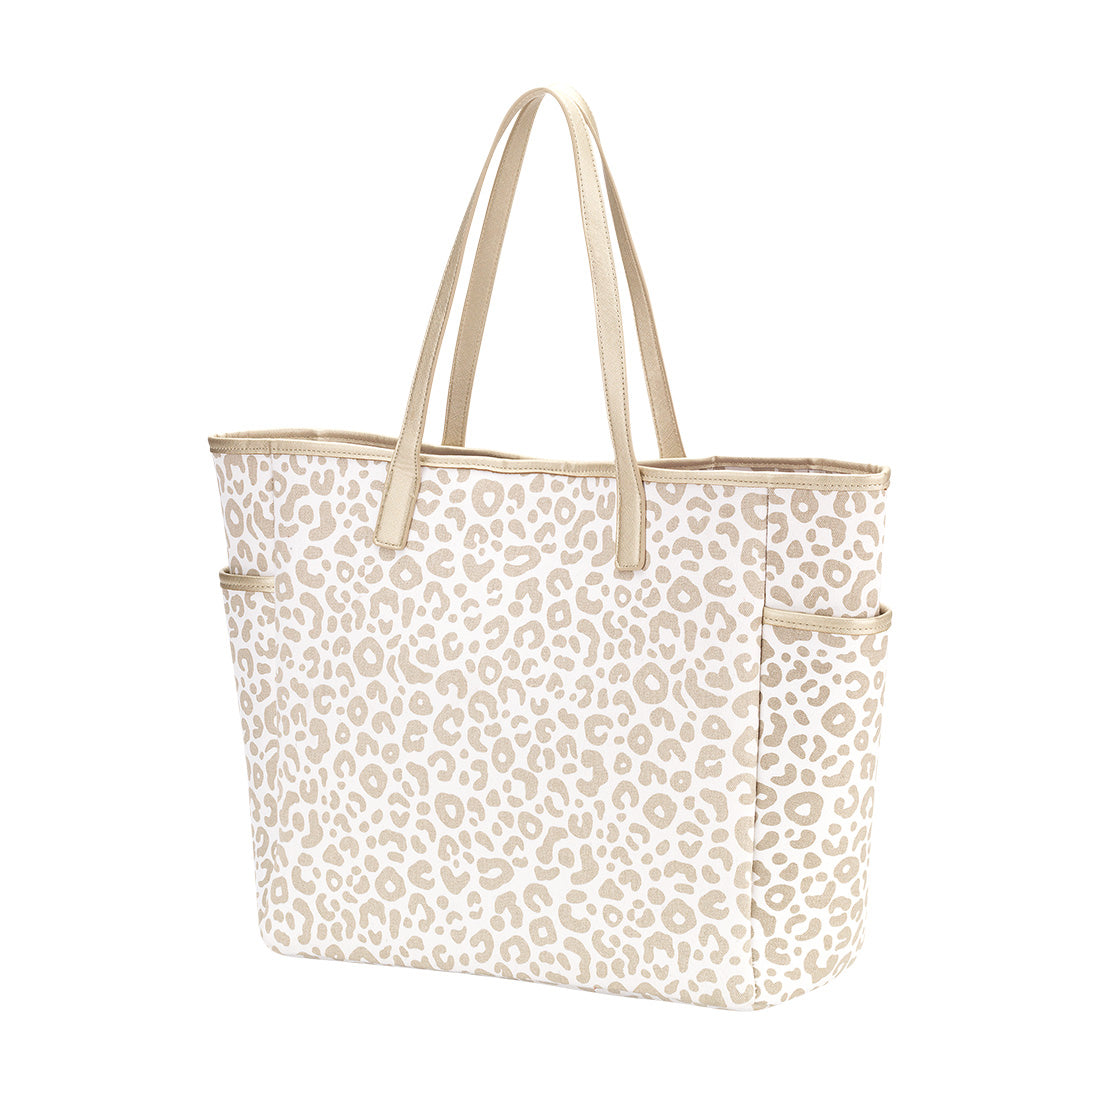 Ivory & Gold Leopard Tote Bag with No Monogram